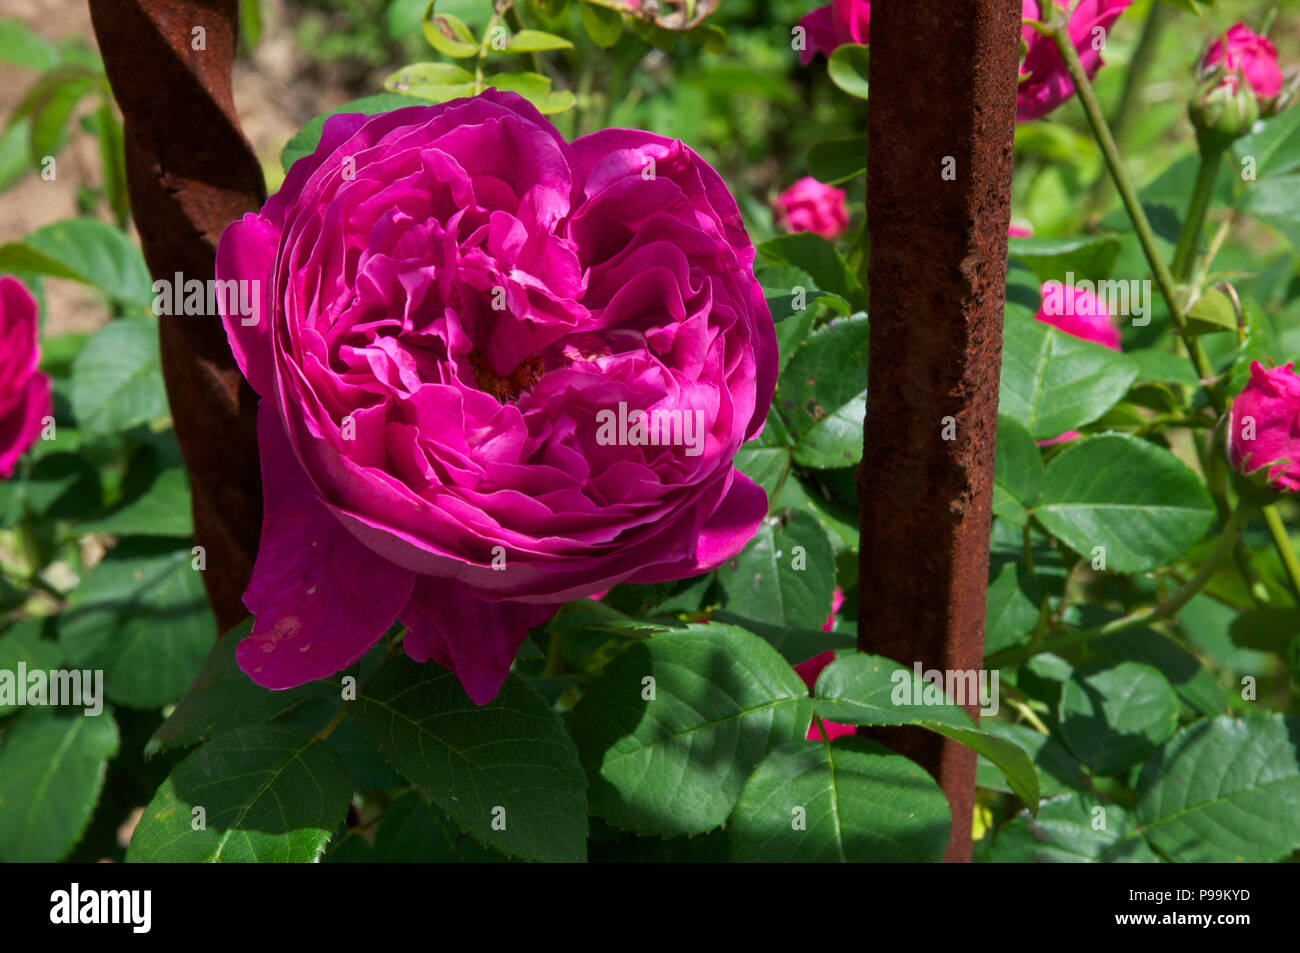 Deep pink rose with convex centre Stock Photo